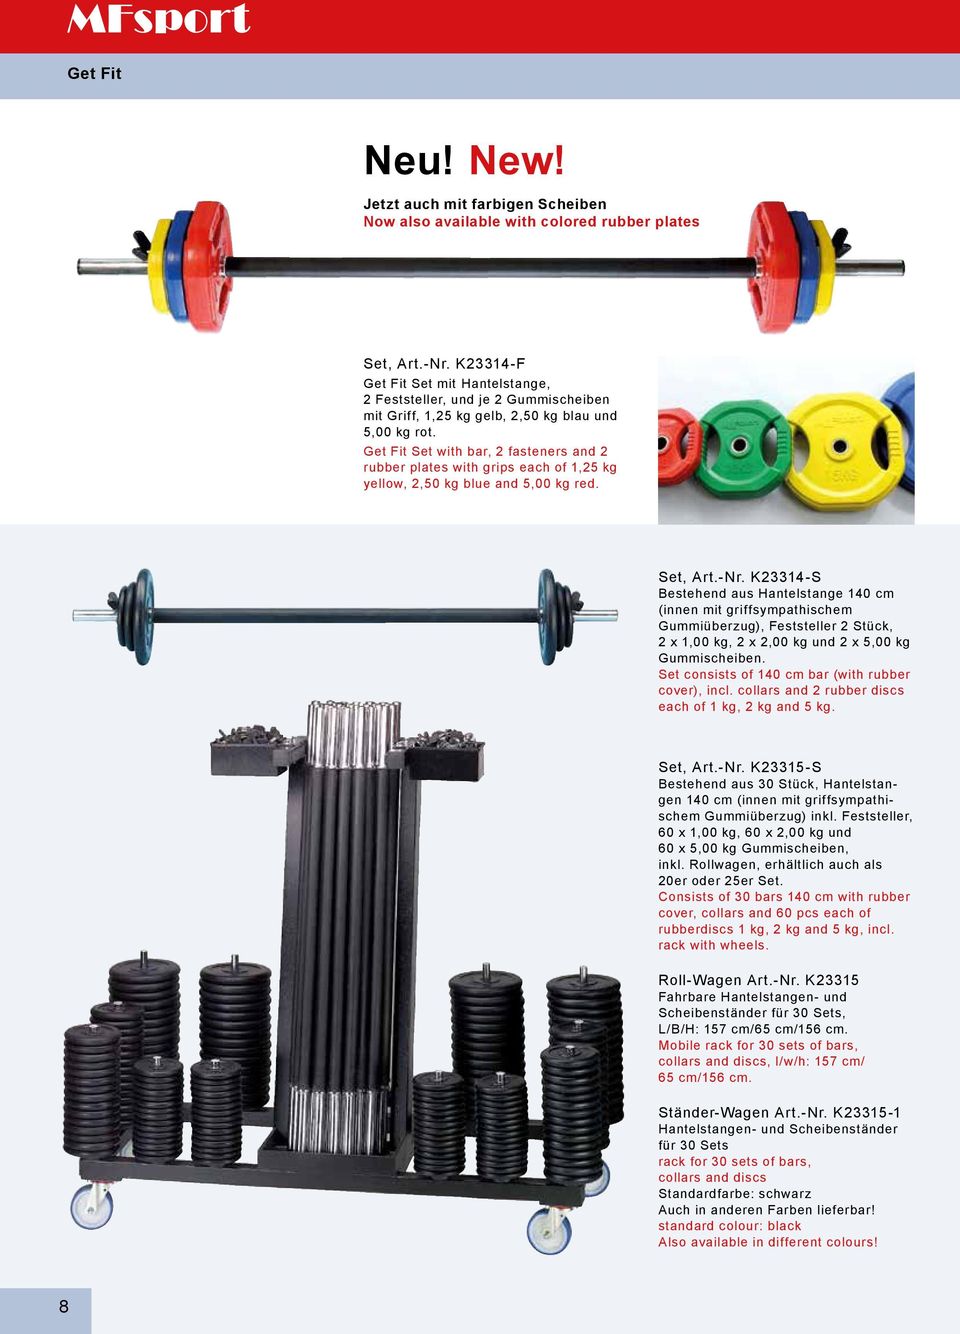 Get Fit Set with bar, 2 fasteners and 2 rubber plates with grips each of 1,25 kg yellow, 2,50 kg blue and 5,00 kg red. Set, Art.-Nr.